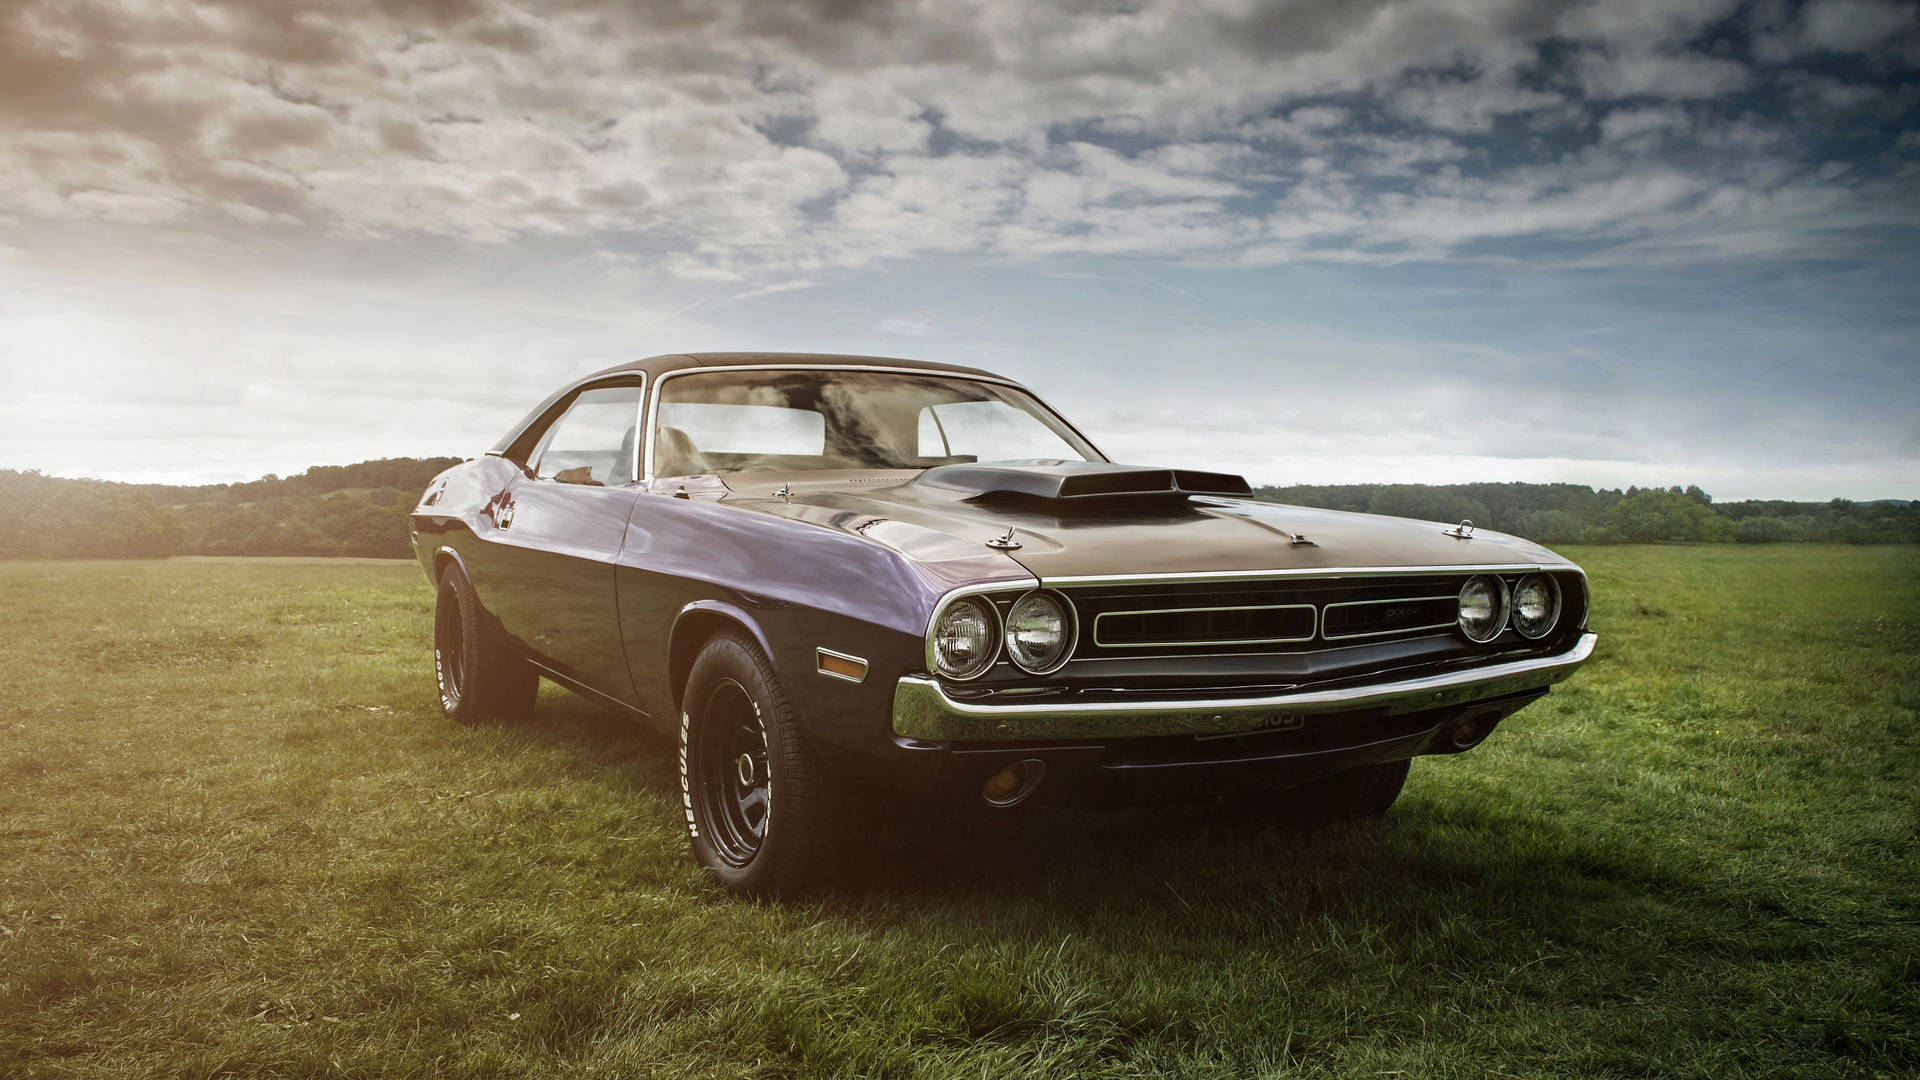 Dodge Challenger Classic Car In the Field Wallpaper